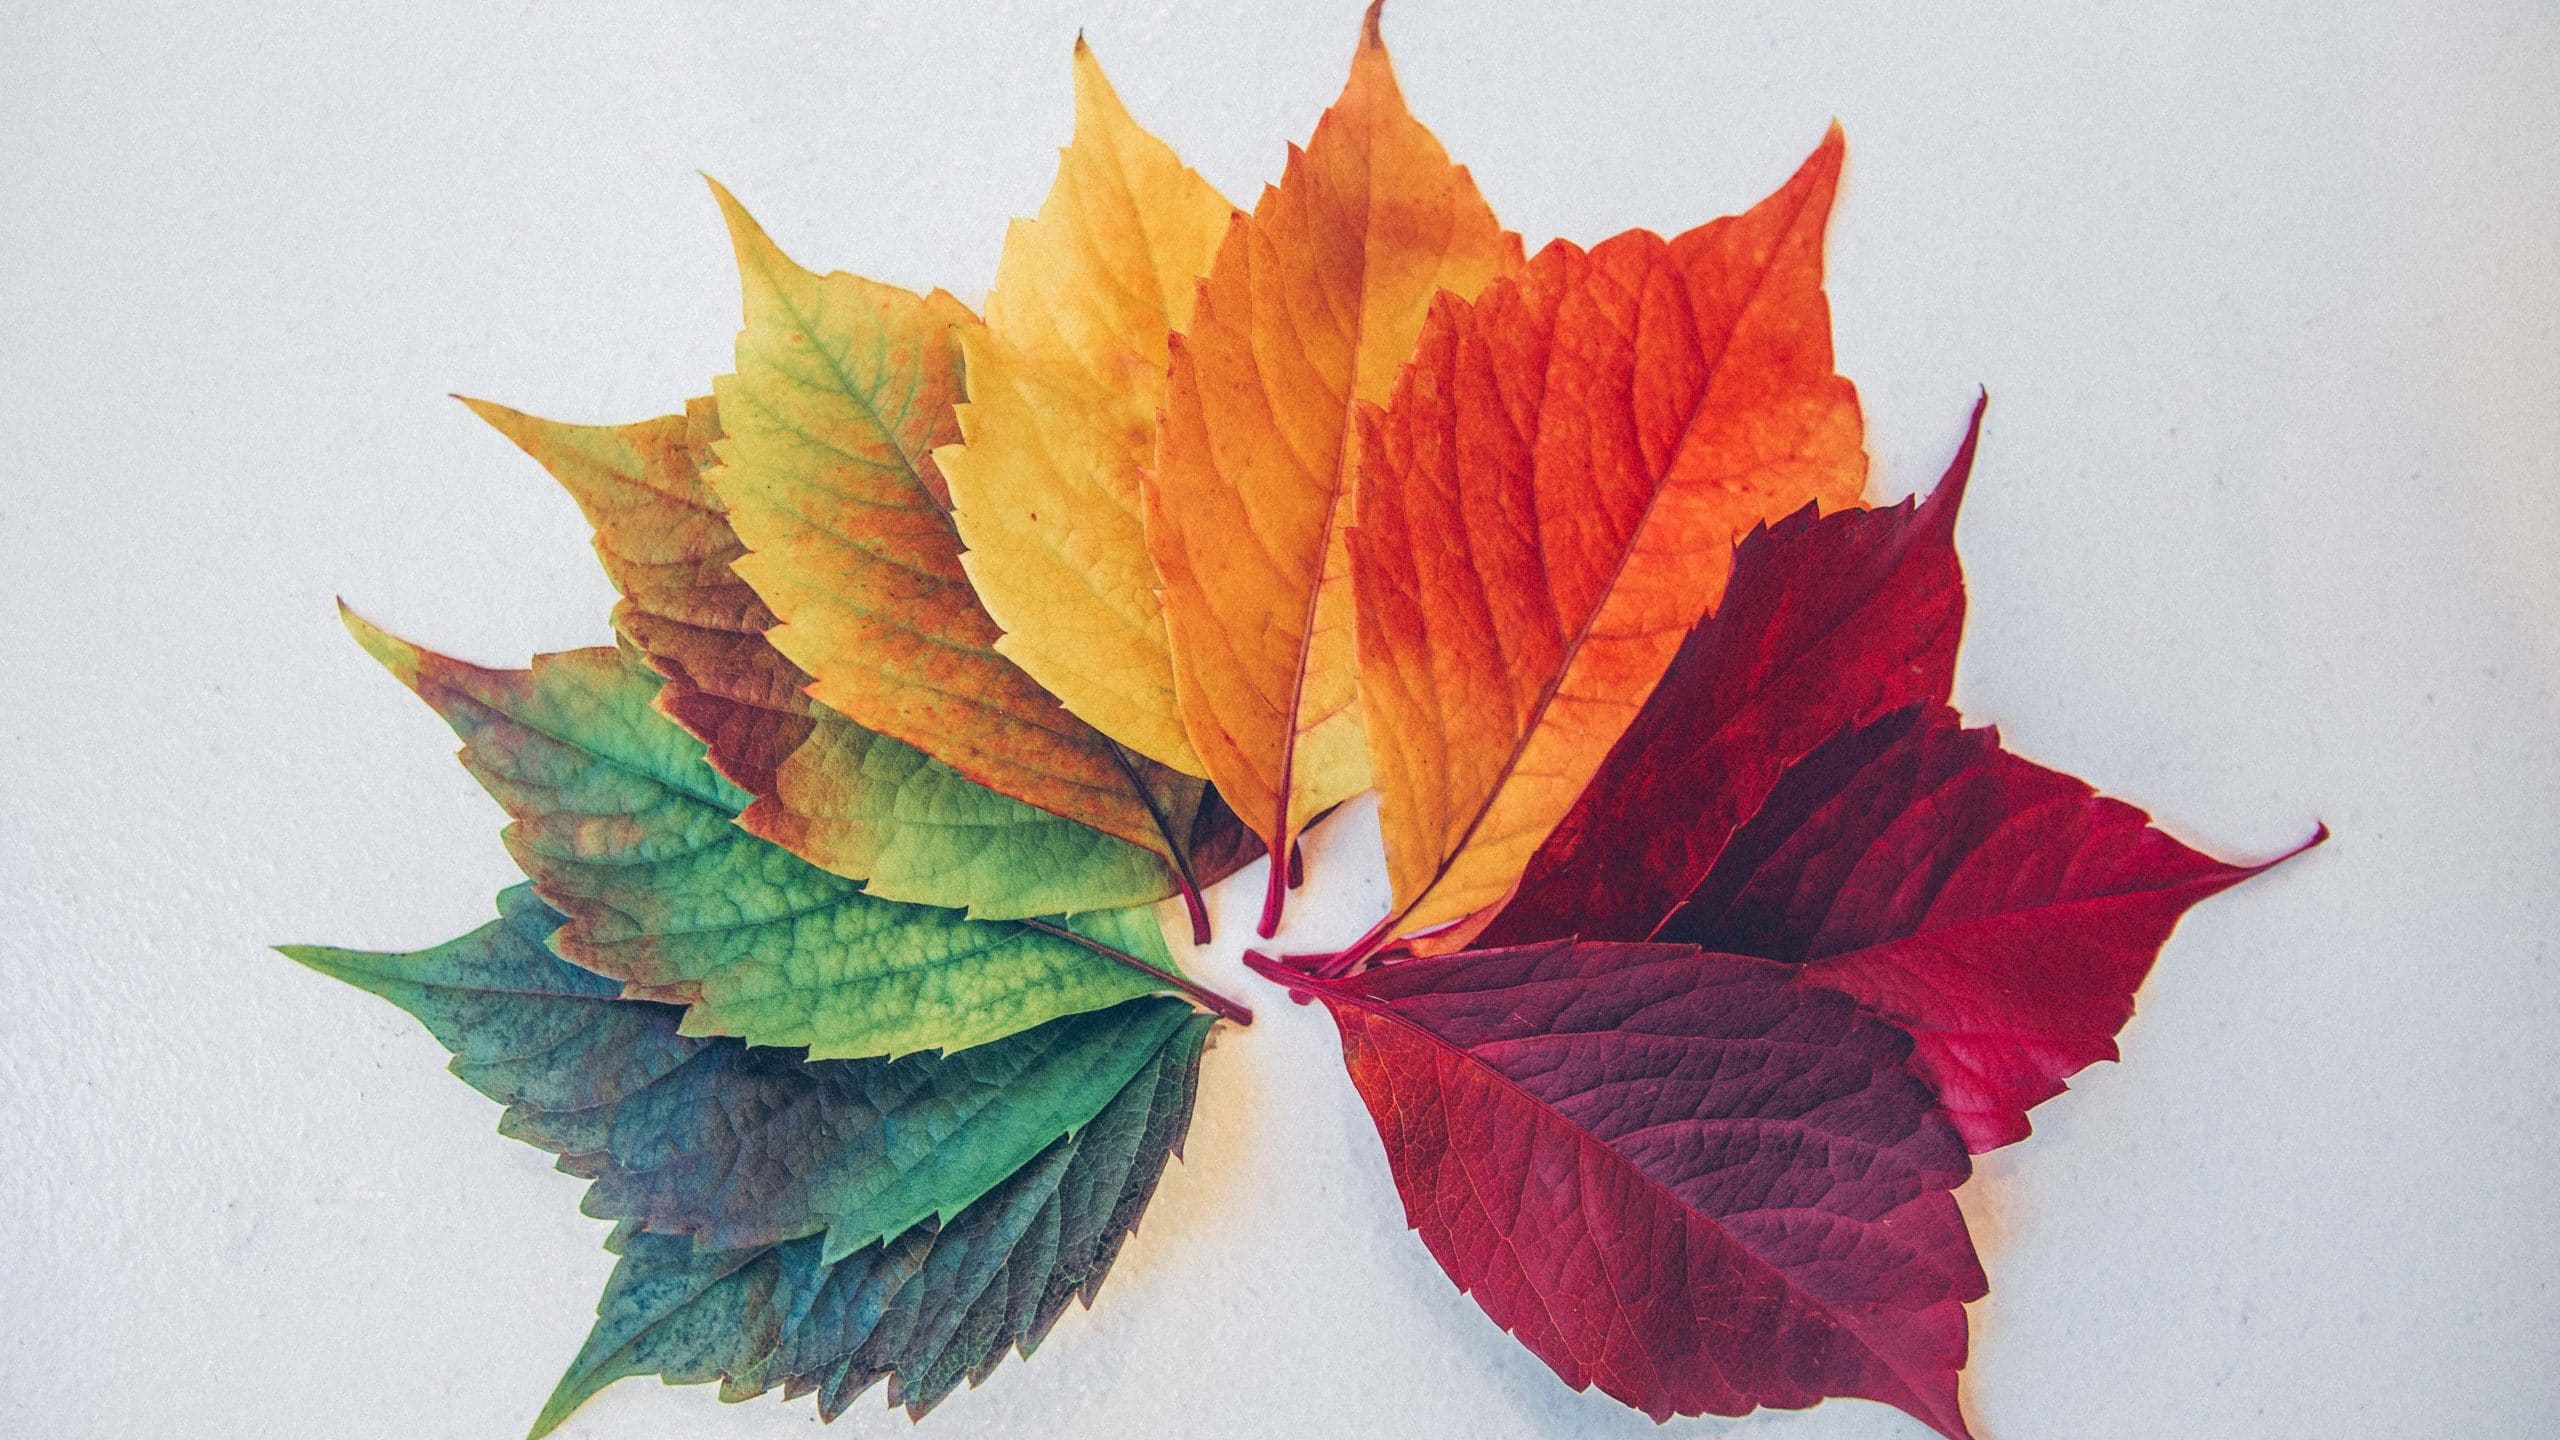 Stock image showing leaves of various colours in a fan-shape.